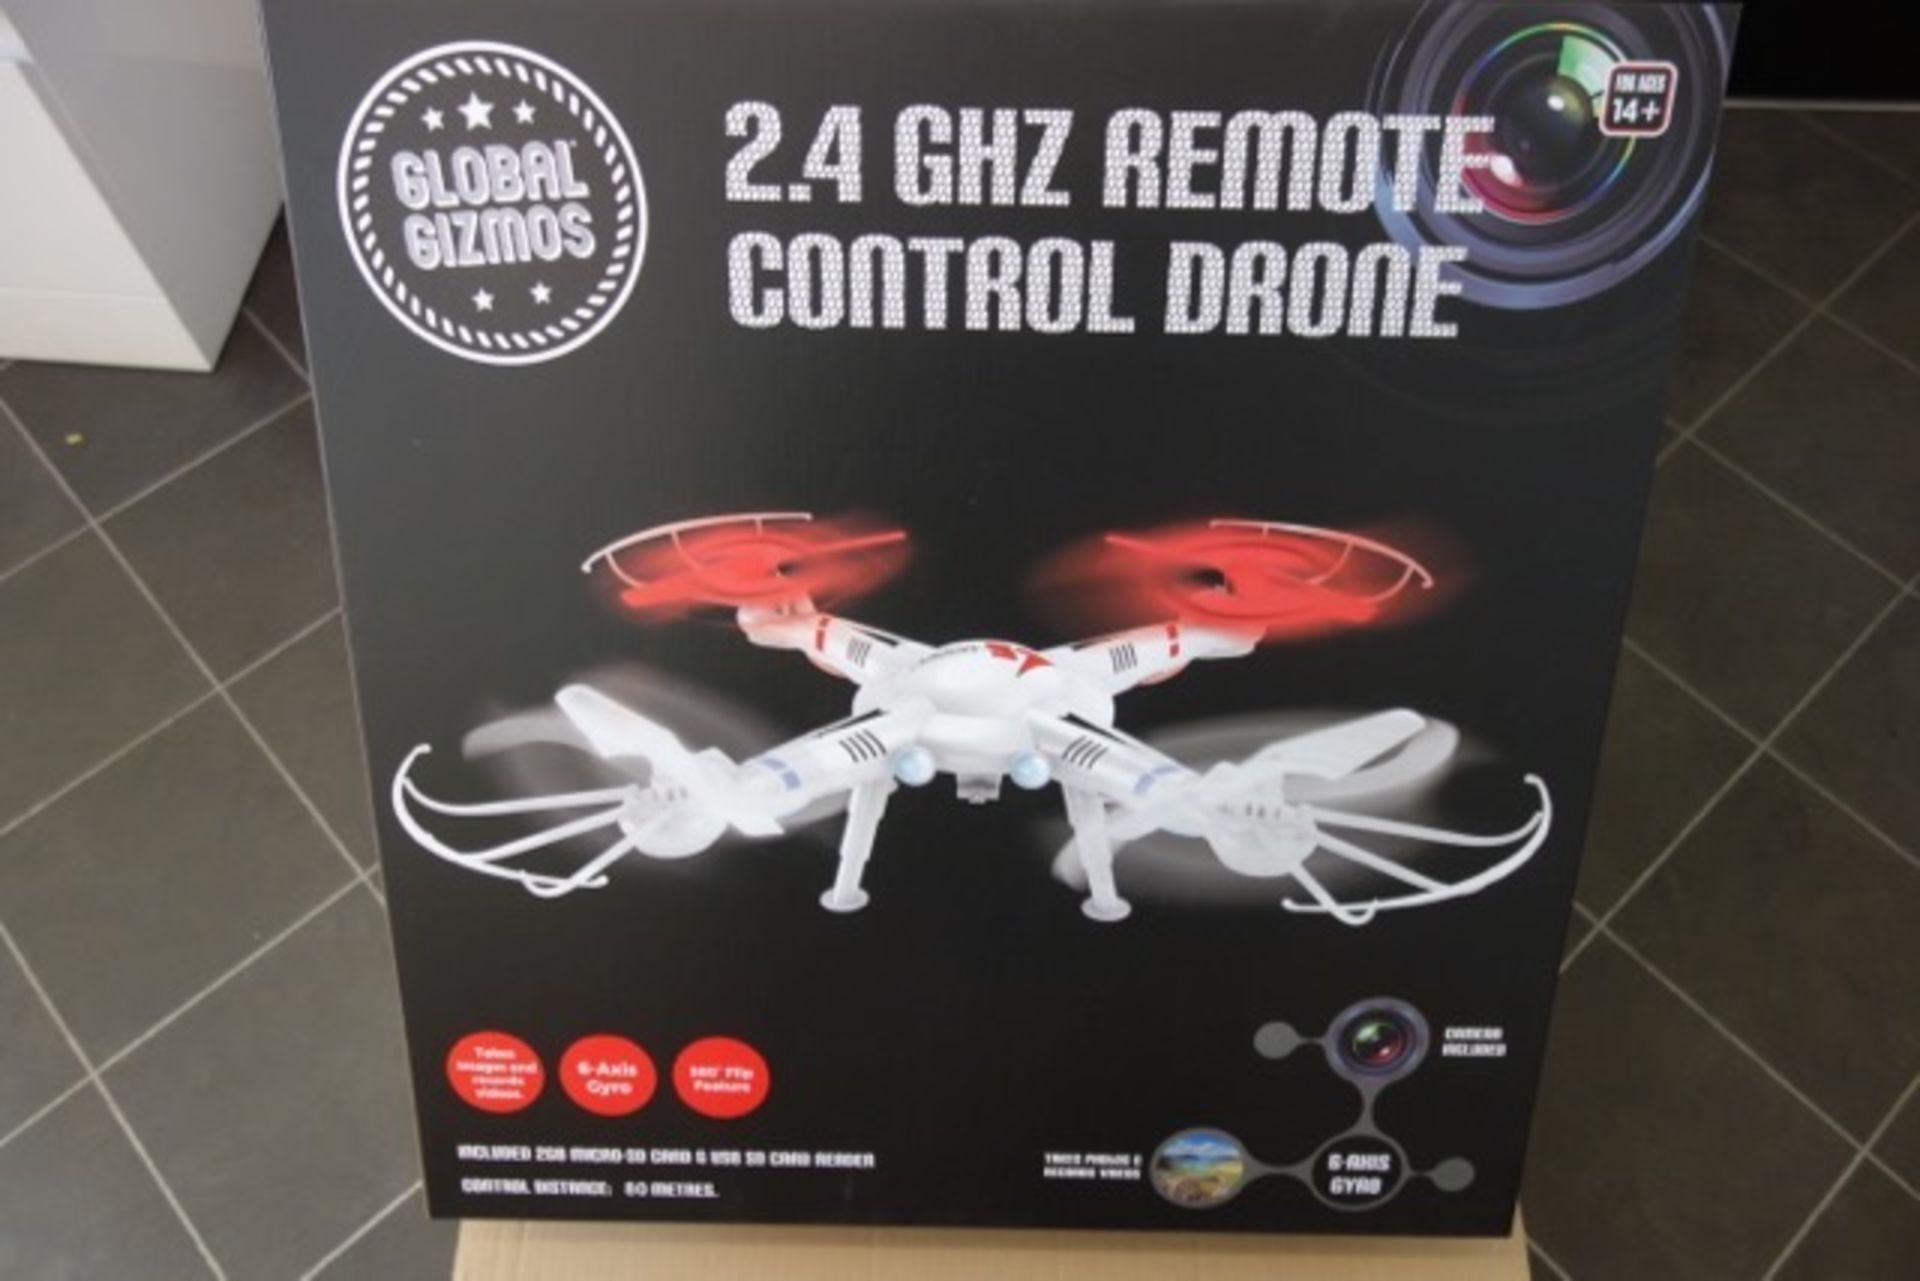 1 x Brand New Global Gizmos 2.4GHZ Remote Control Drone. Takes images & recordes videos, 6 axis